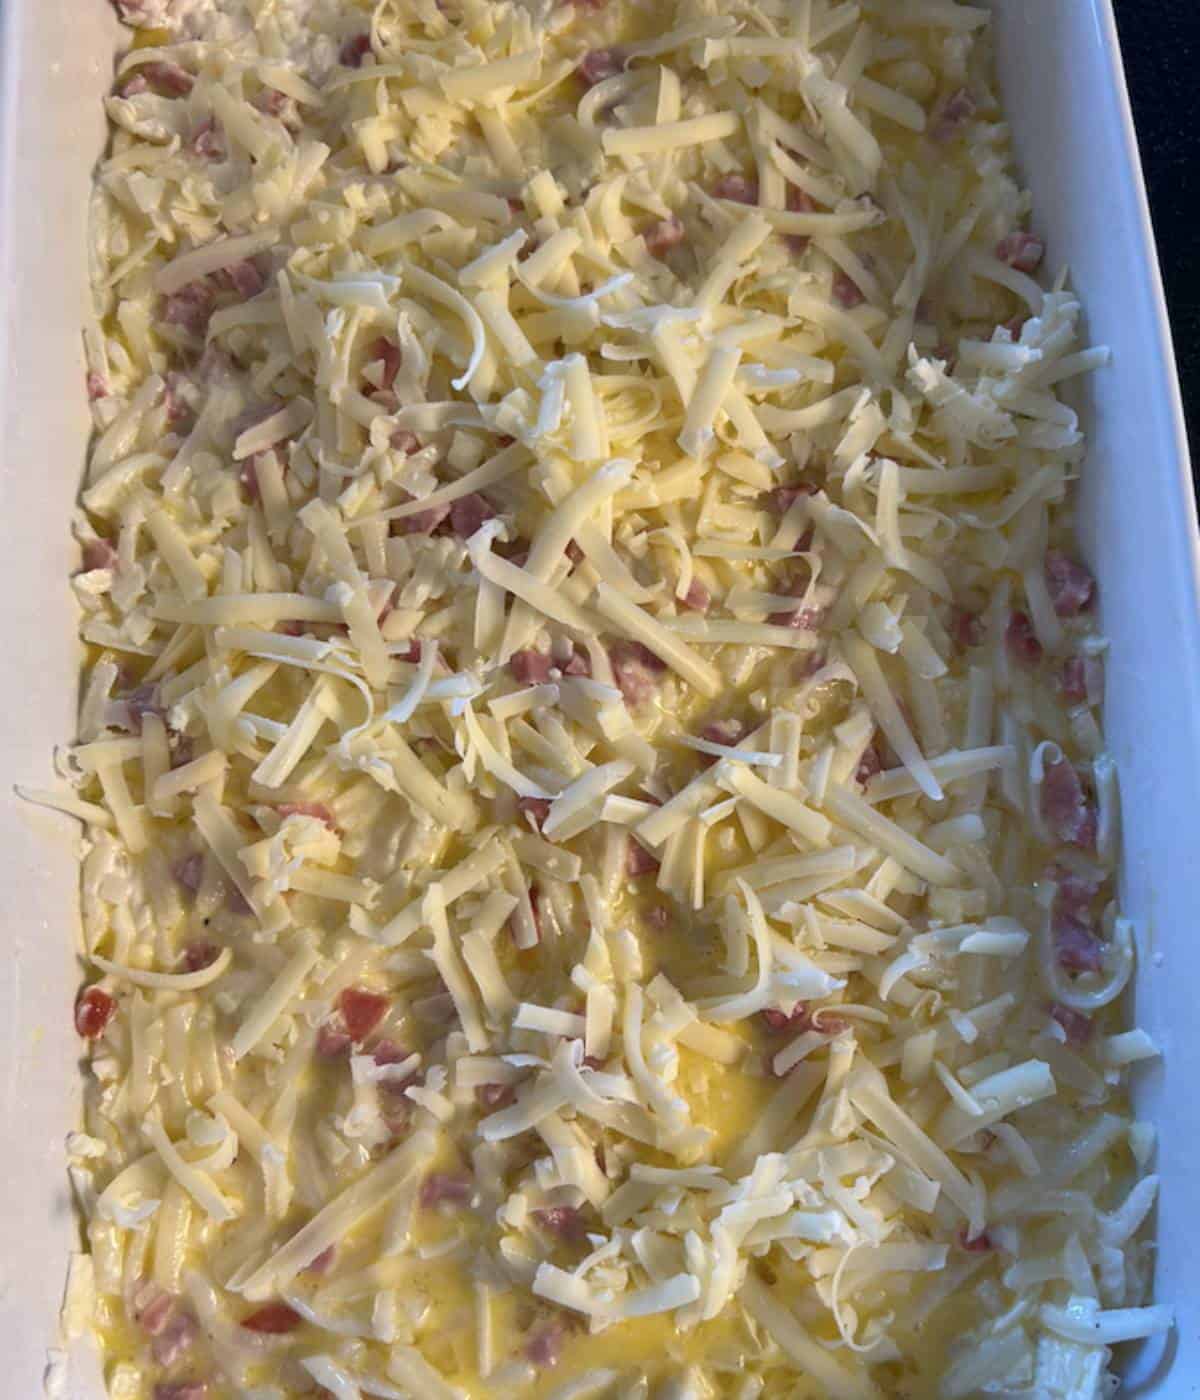 Breakfast Casserole with cheese ready to bake.